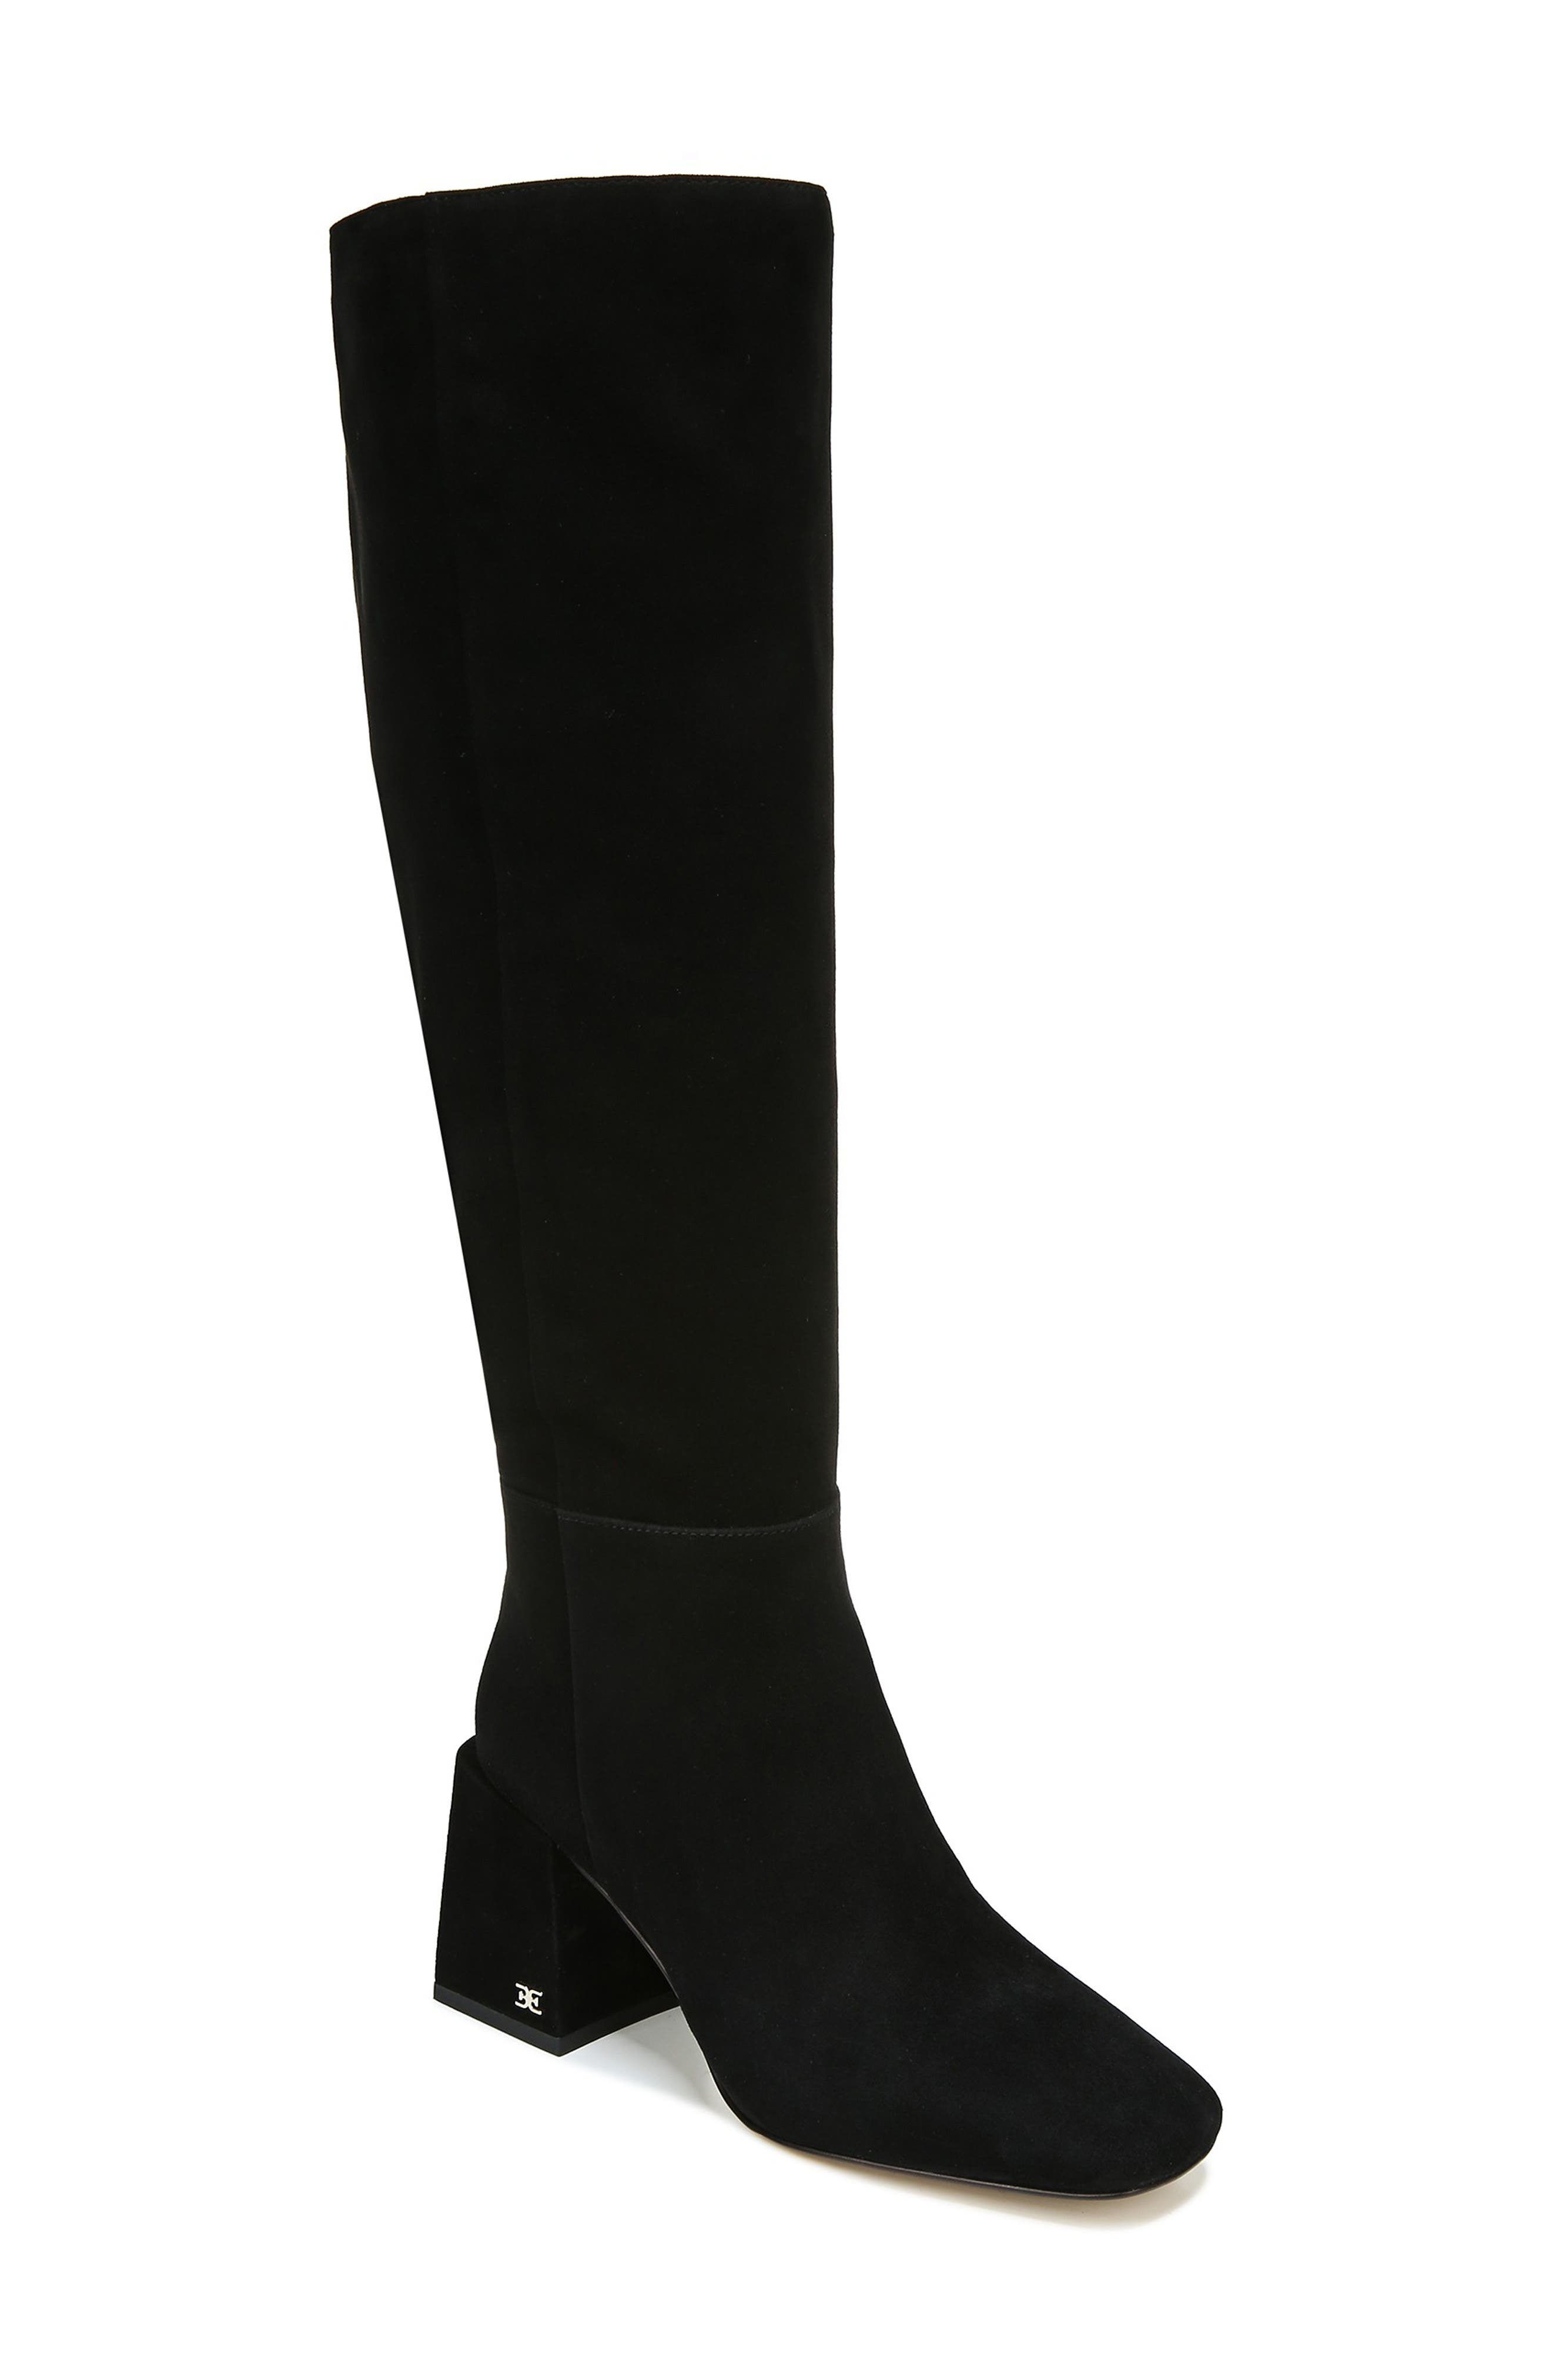 nordstrom boots womens sale